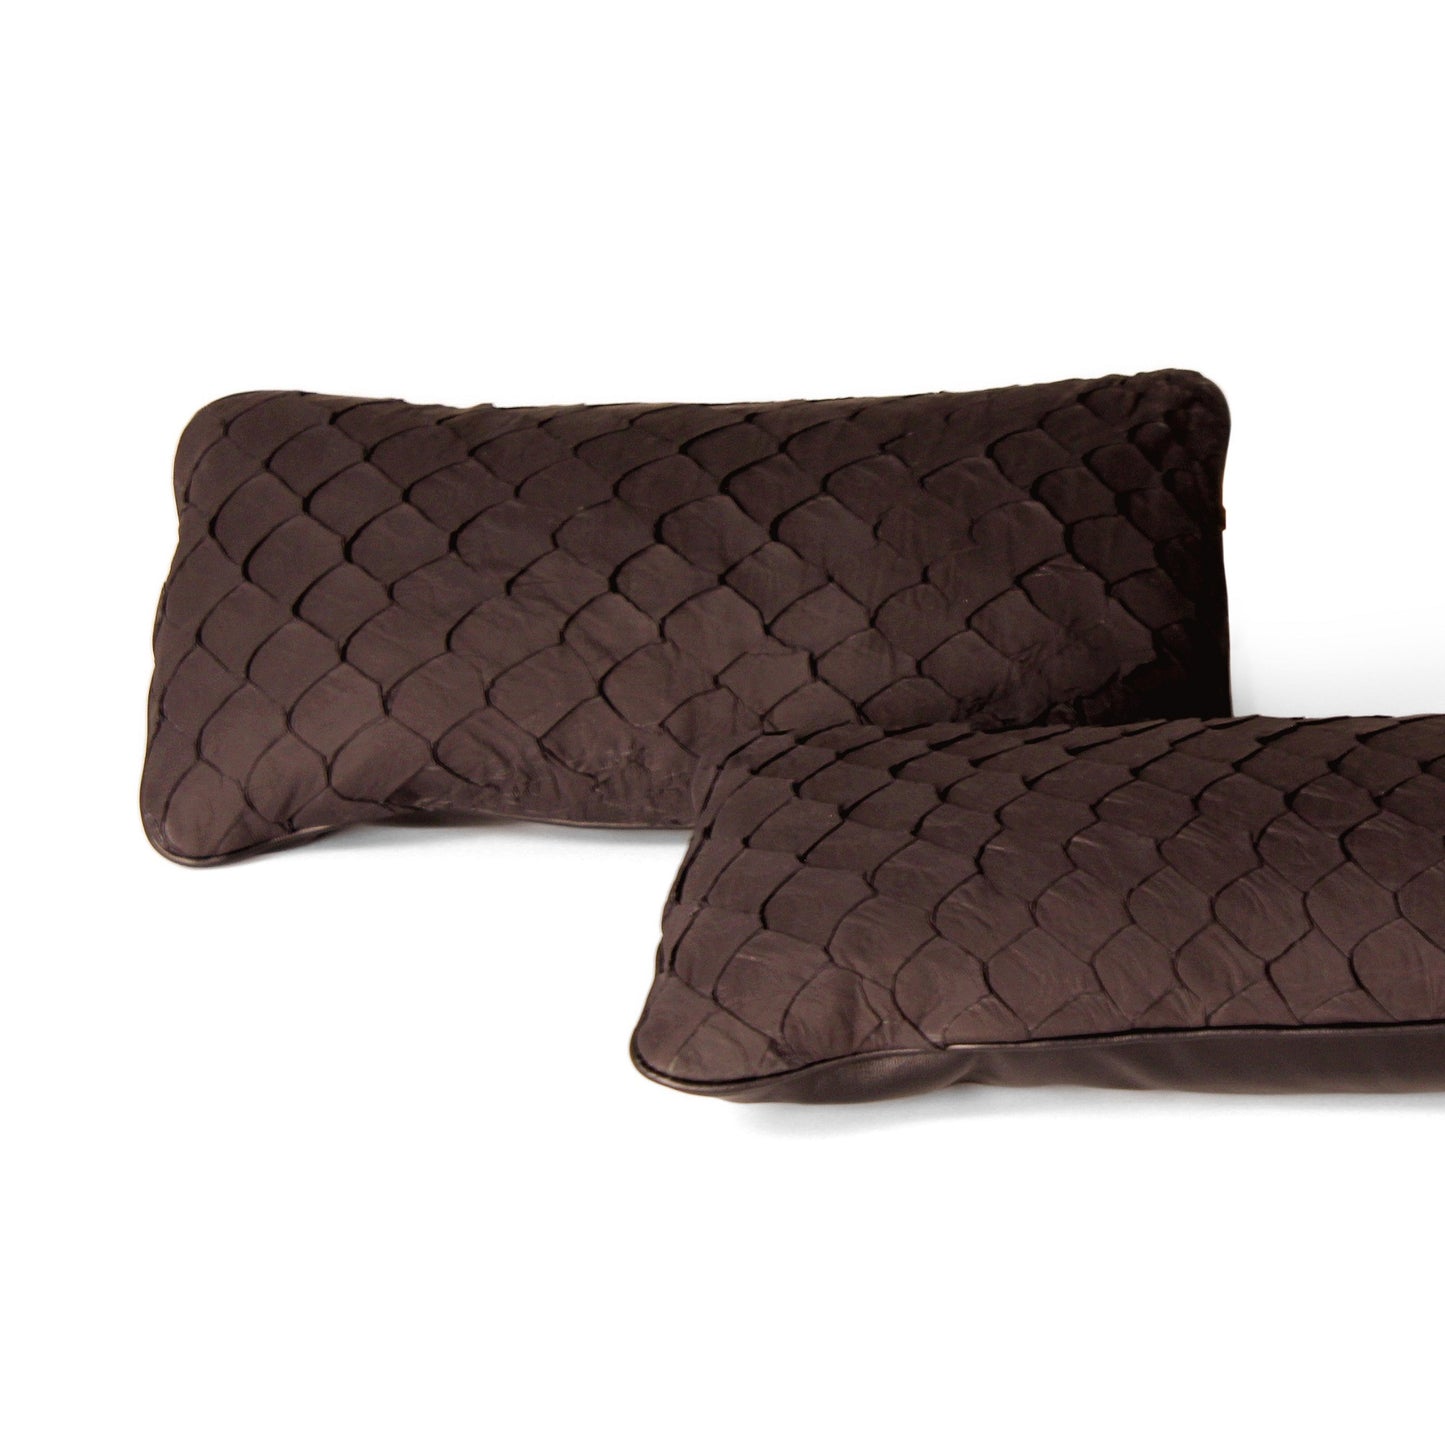 Bespoke Piracucu Pillow with Leather Back - Small Size